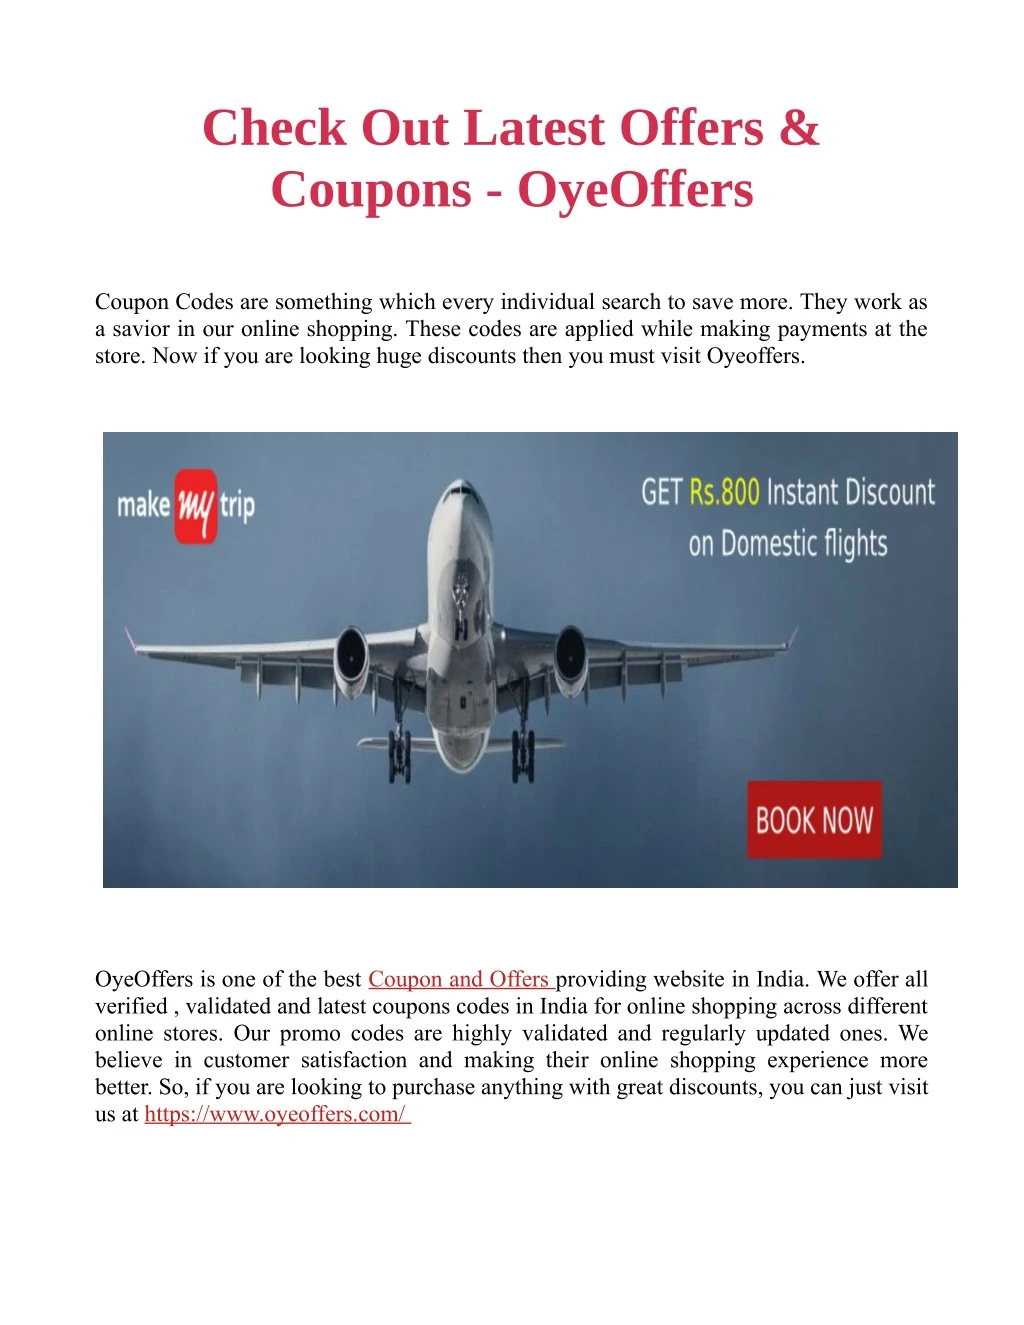 check out latest offers coupons oyeoffers